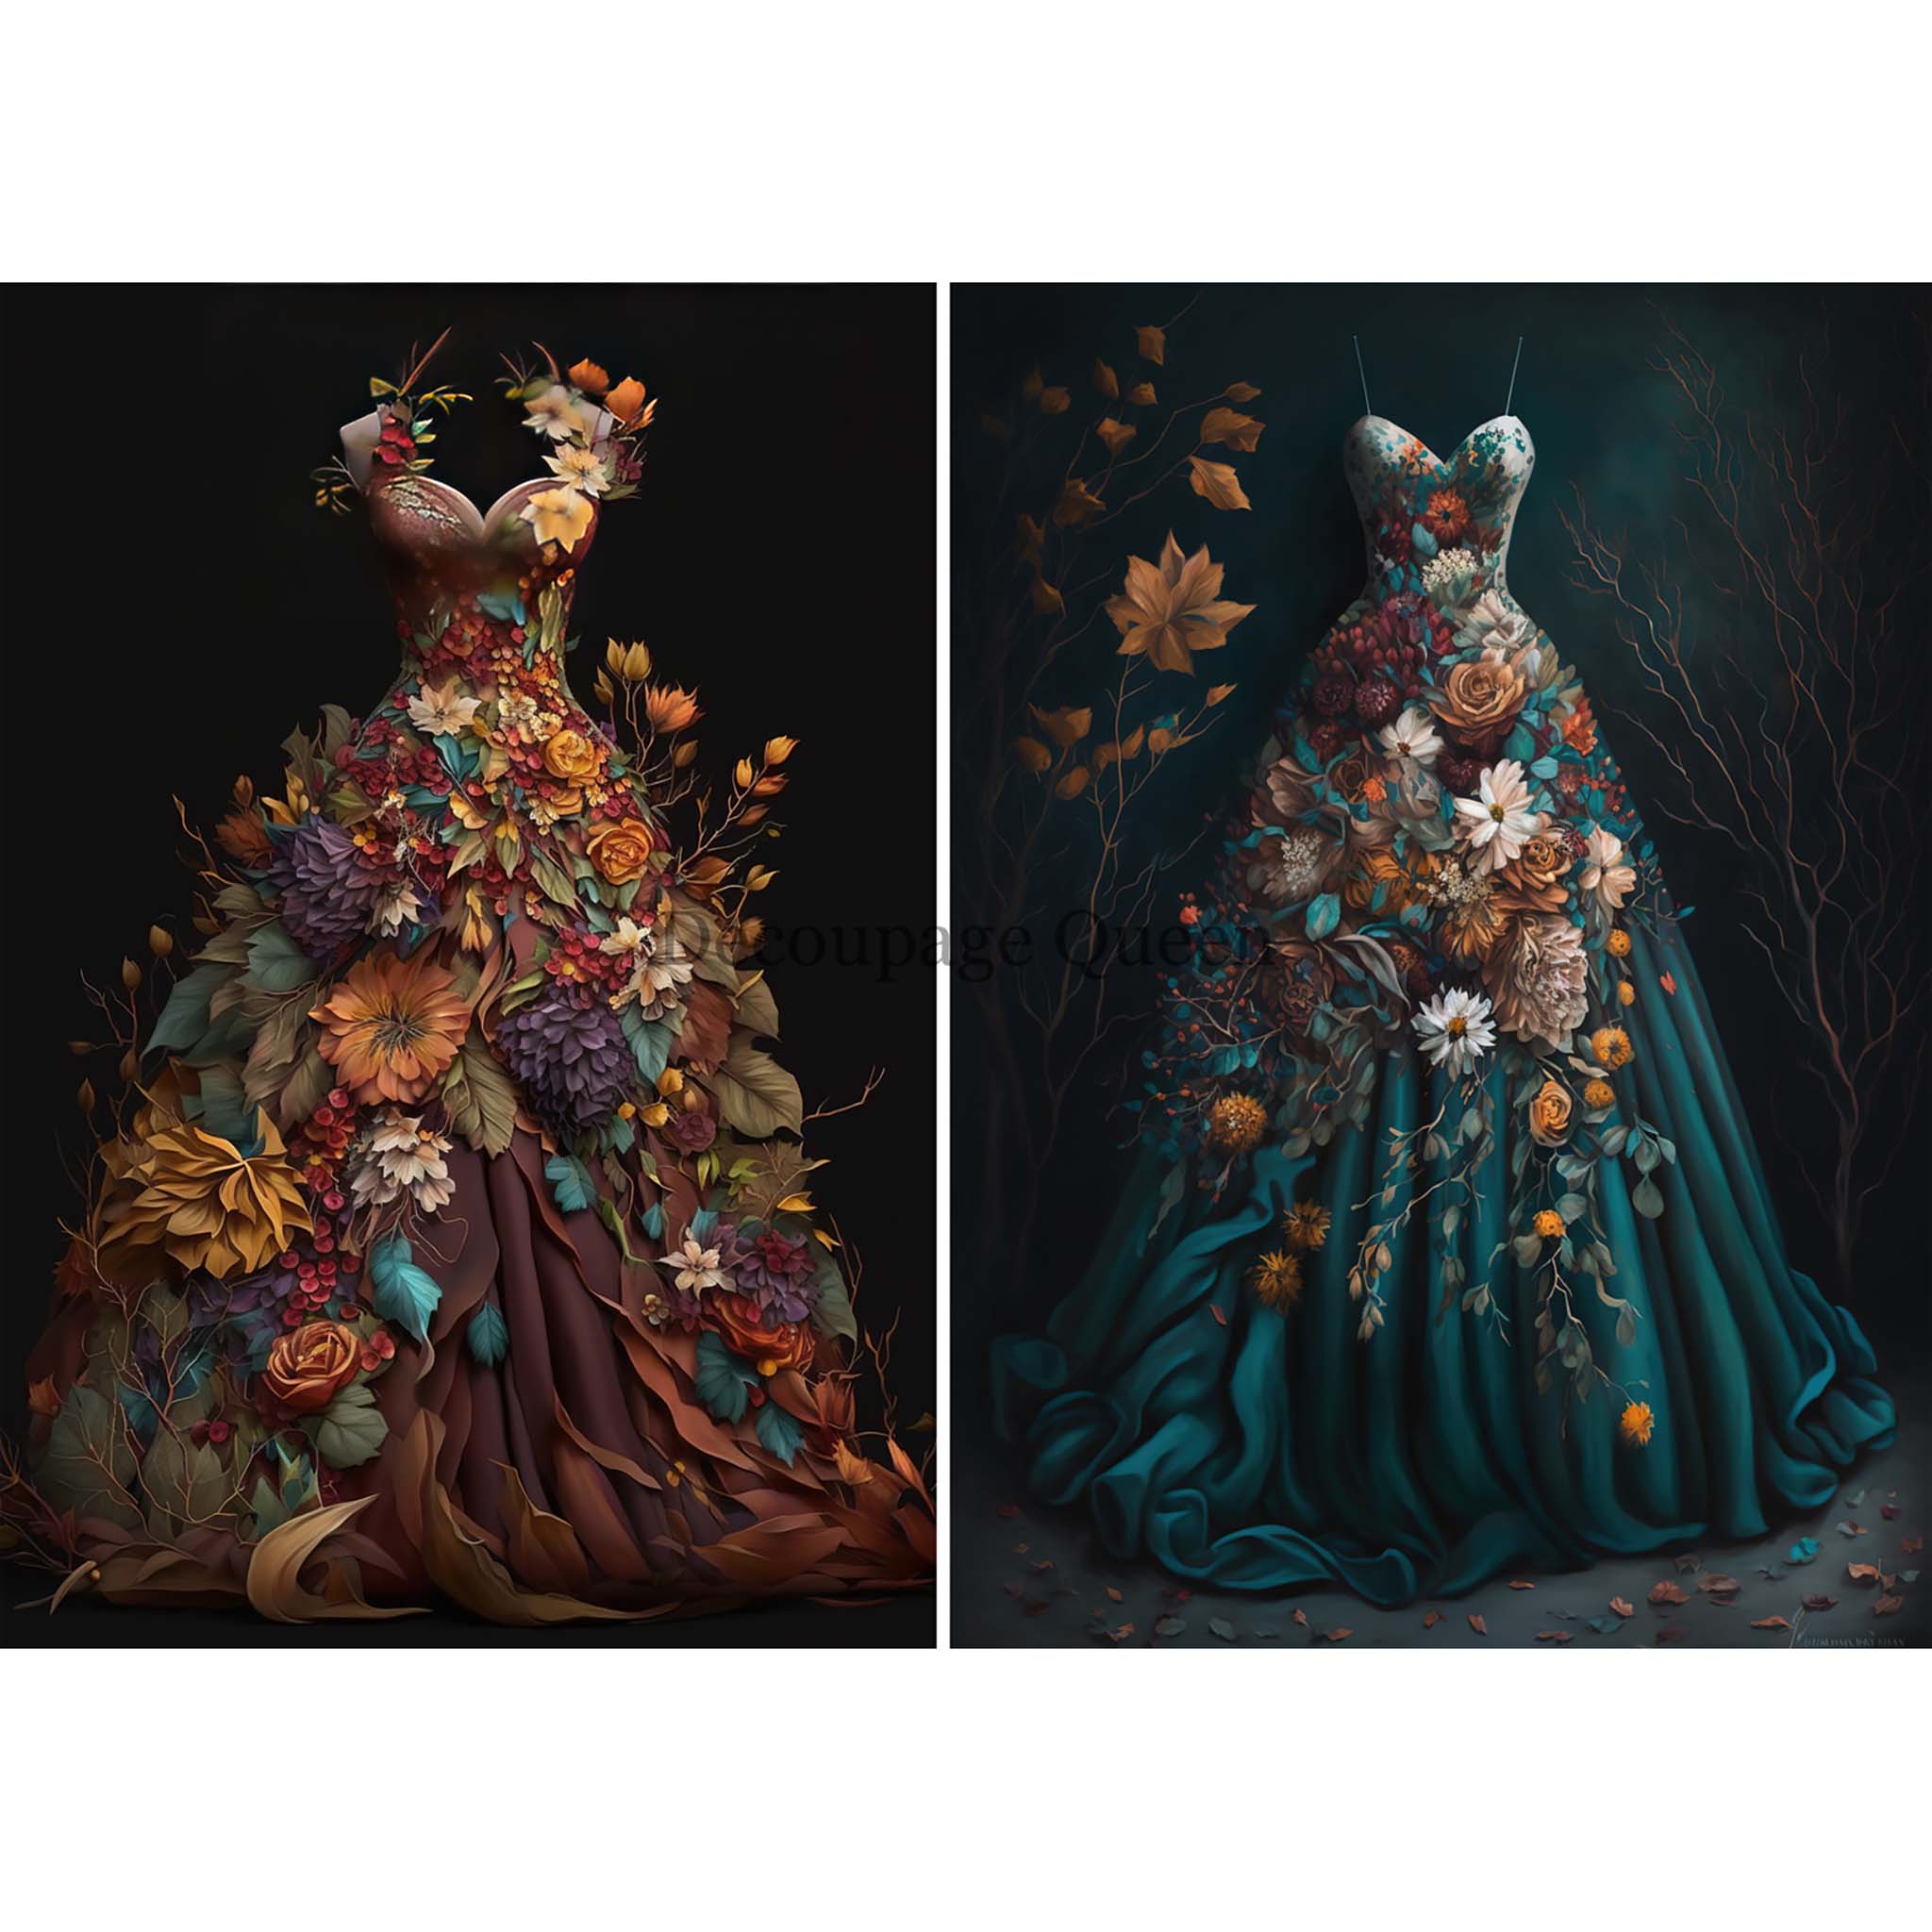 A3 rice paper design that features 2 evening gowns. The gown on the left is maroon and orange and the gown on the right is dark teal. Both are covered in autumn flowers and foliage. White borders are on the top and bottom.